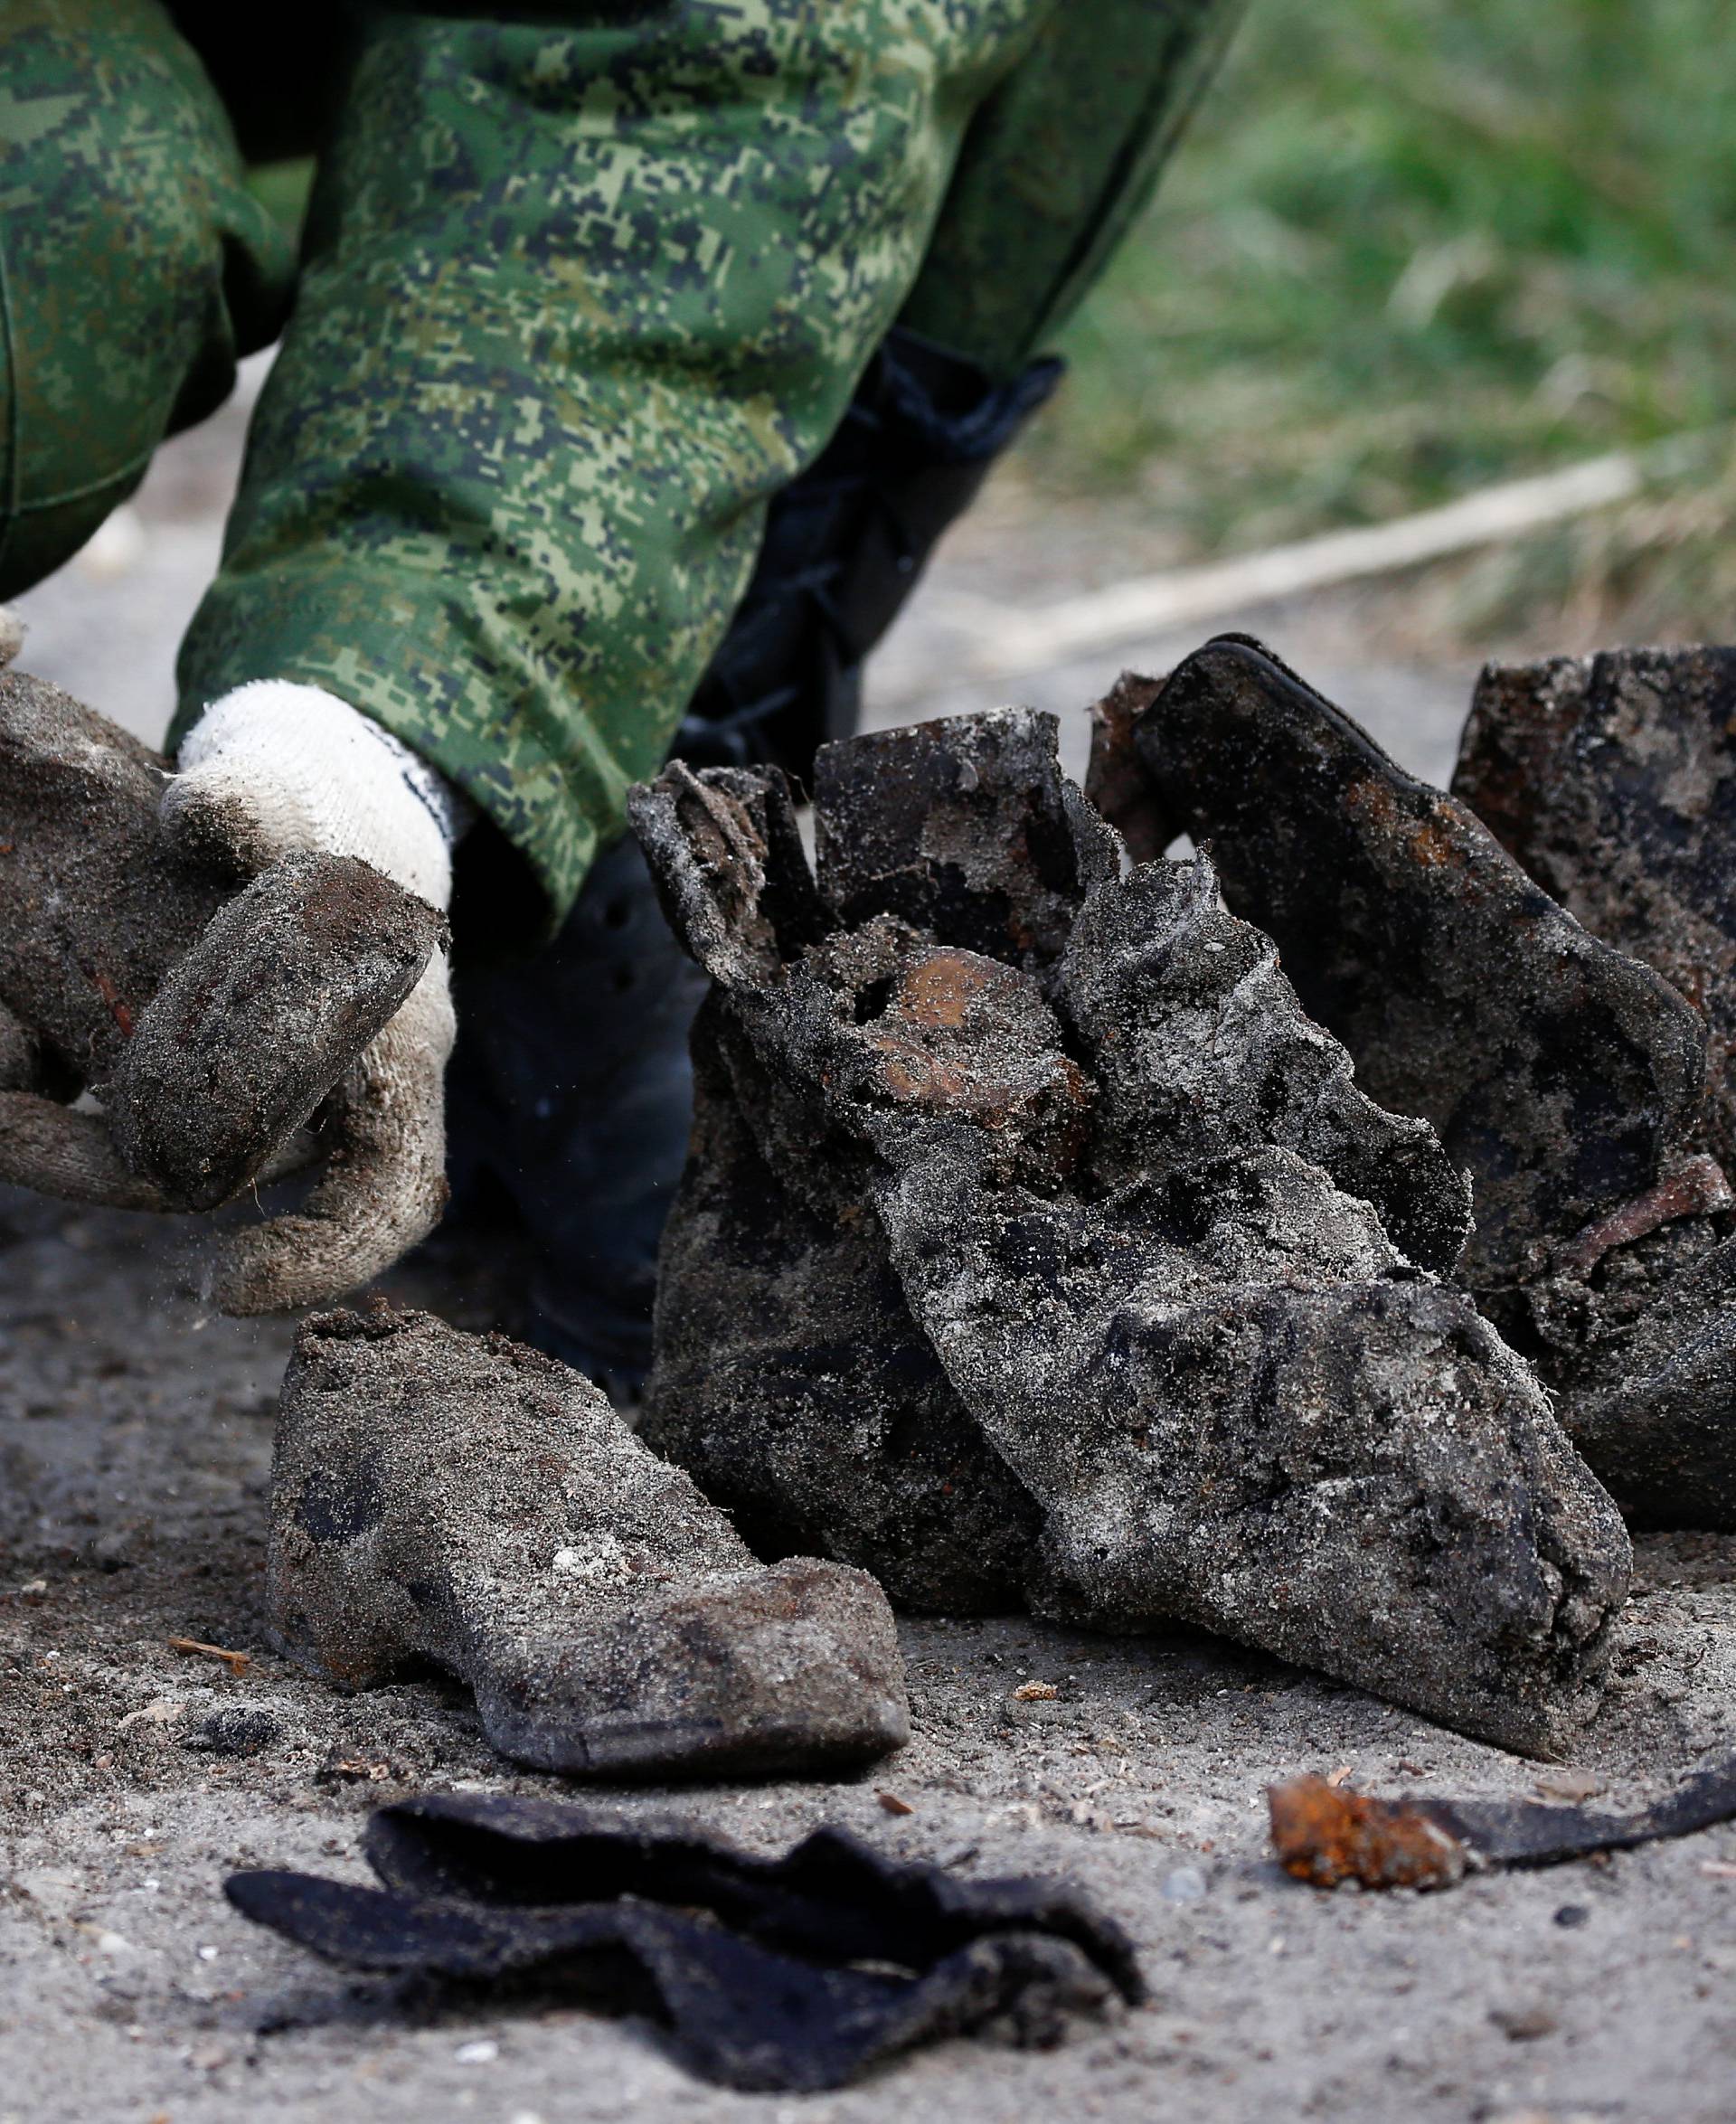 A soldier from a special "search battalion" of Belarus Defence Ministry takes part in the exhumation of a mass grave containing the remains of about 730 prisoners of a former Jewish ghetto, discovered at a construction site in the centre of Brest